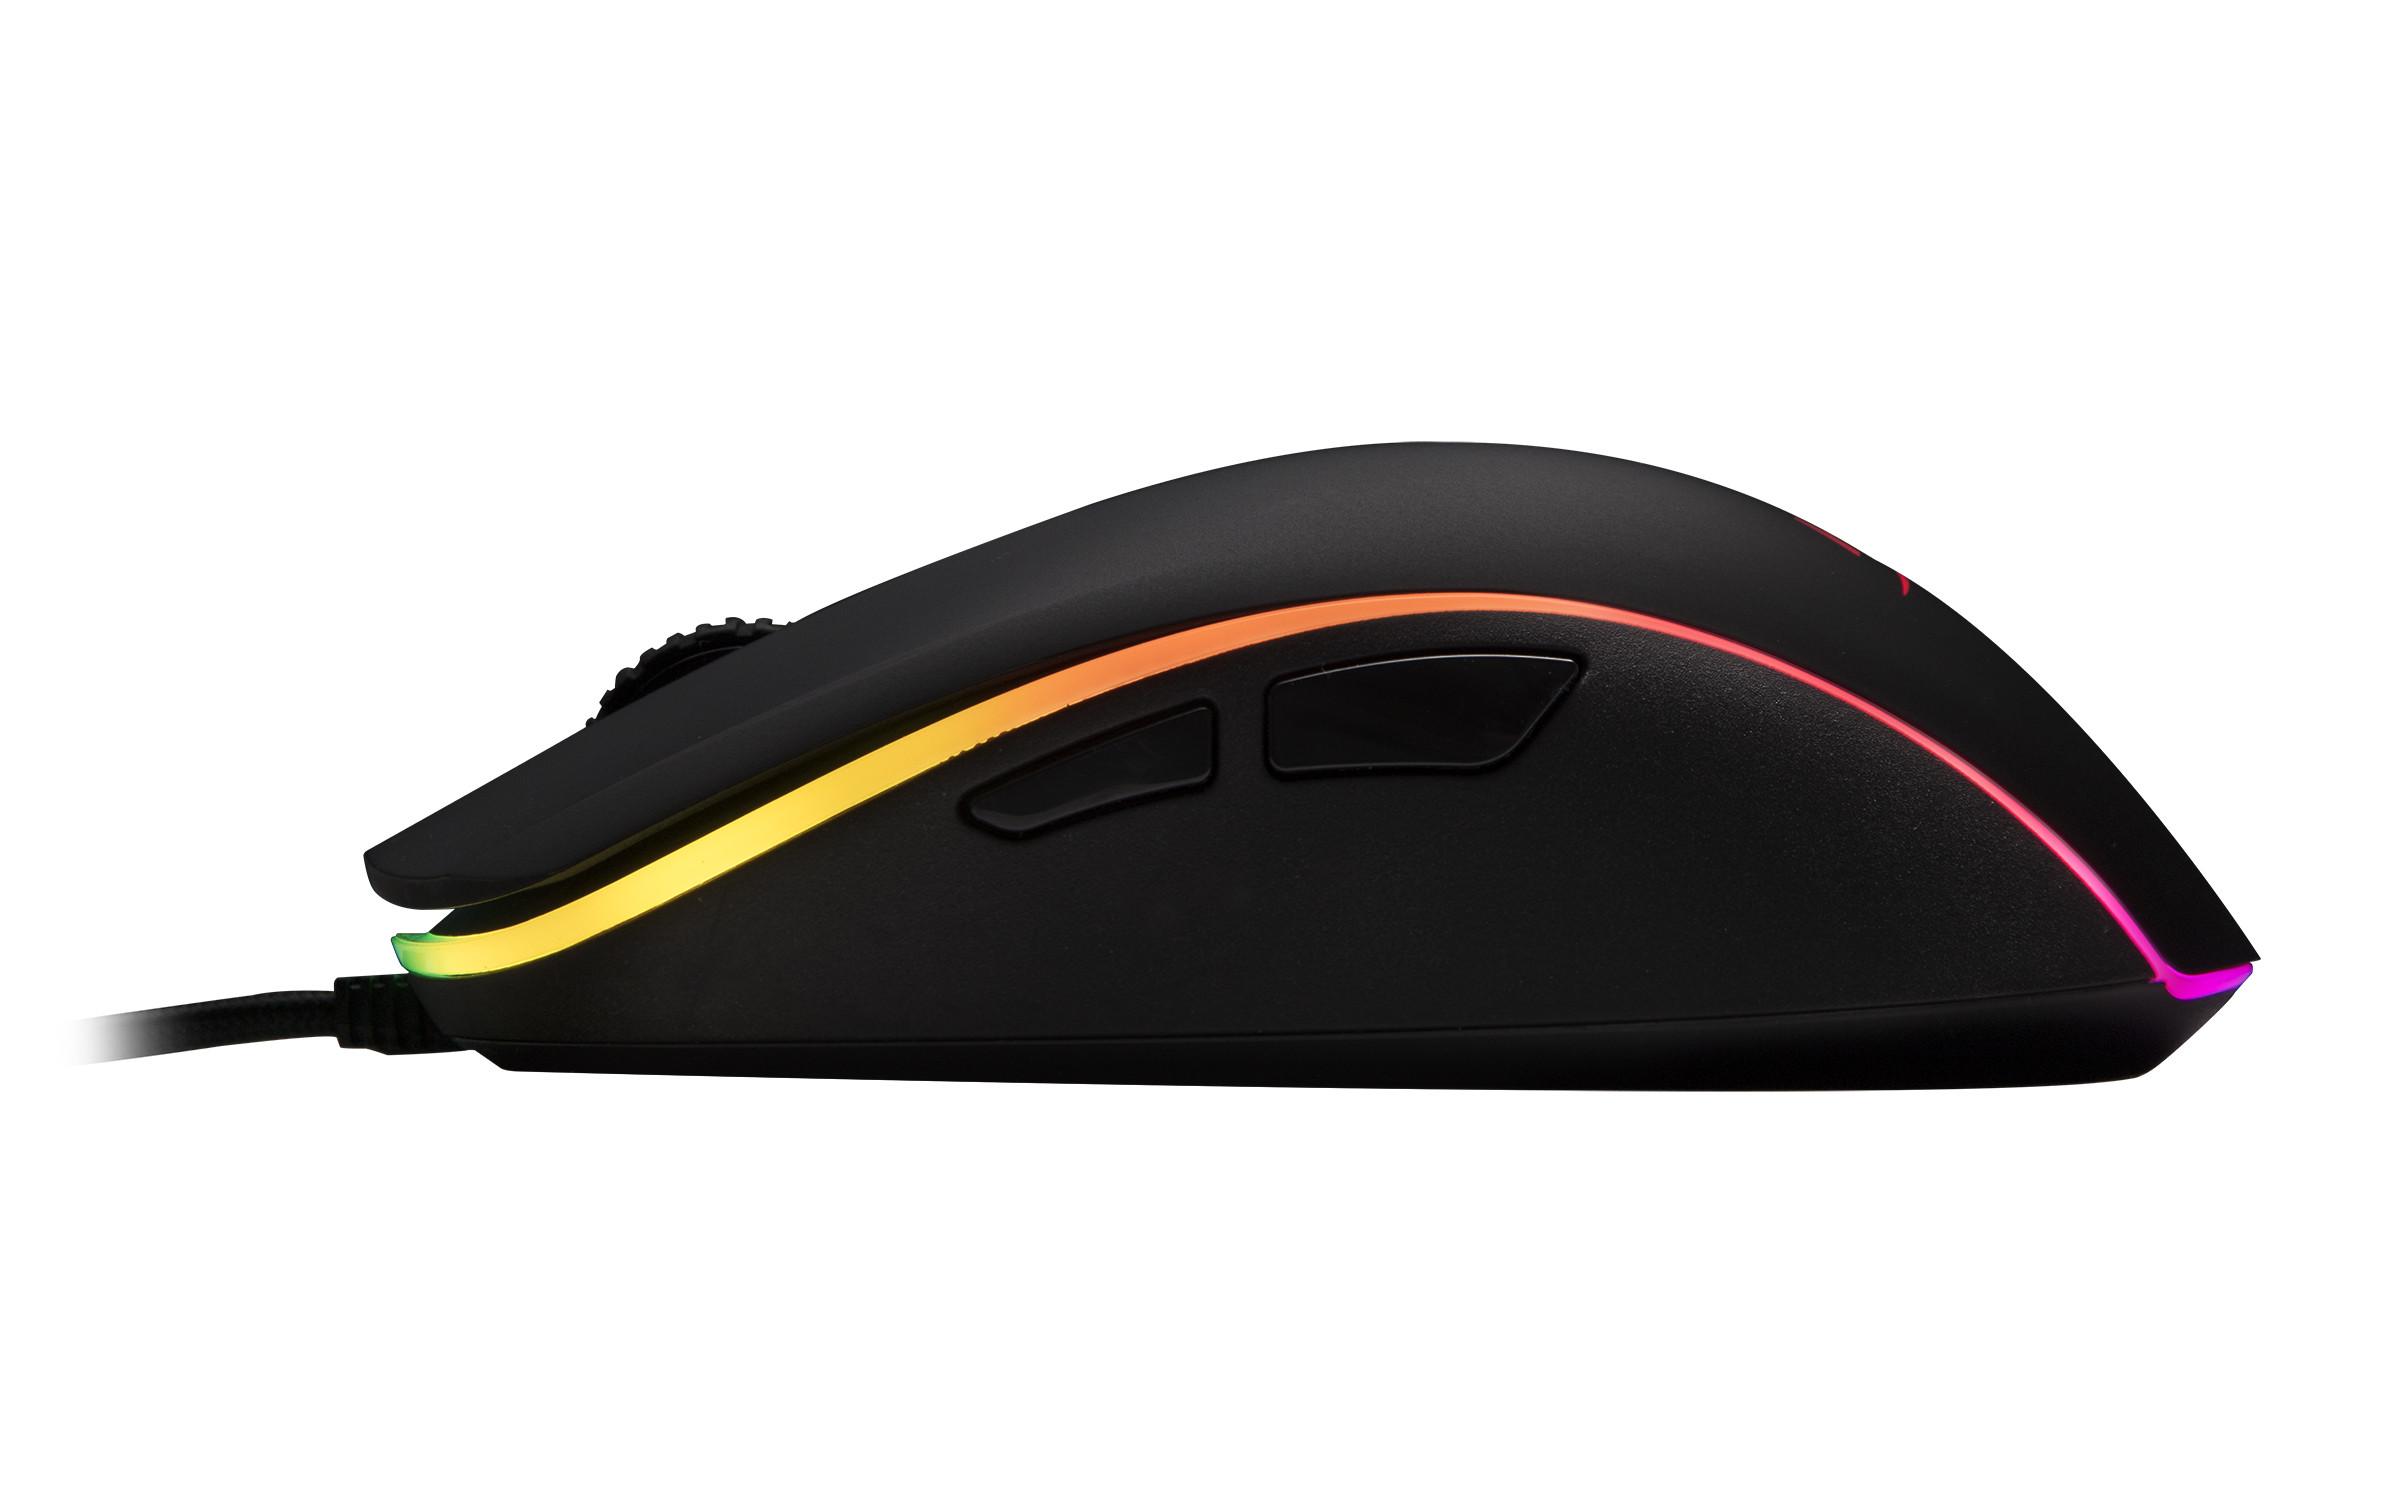 HyperX Pulsefire Surge Gaming Mouse RGB - image 4 of 7